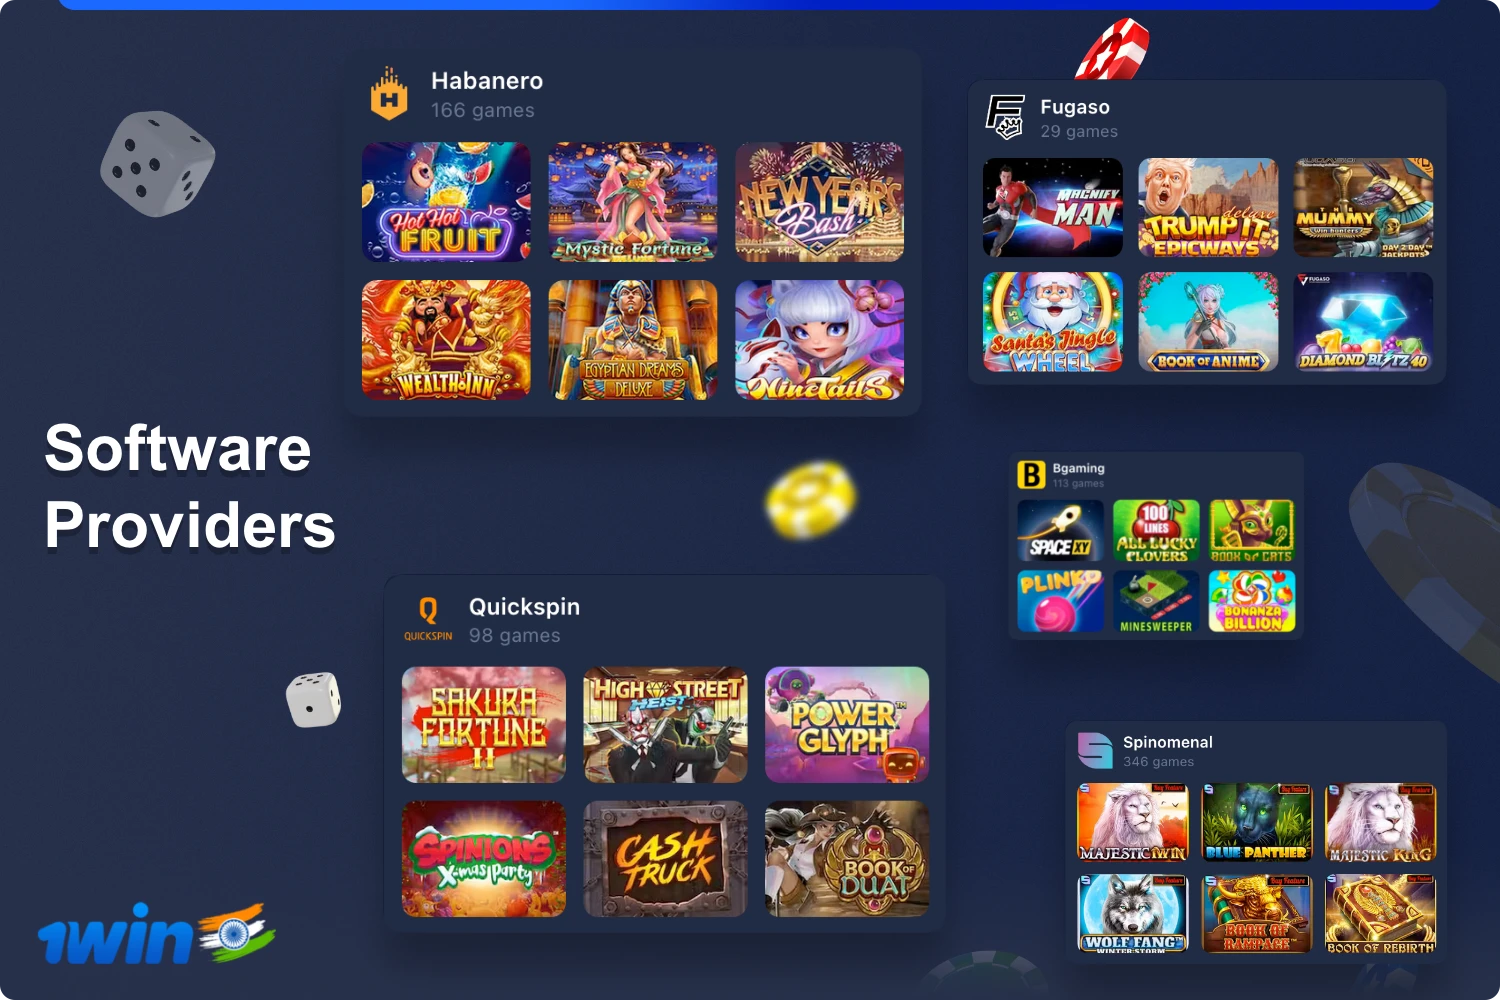 At the casino 1win presents the best games from leading software providers